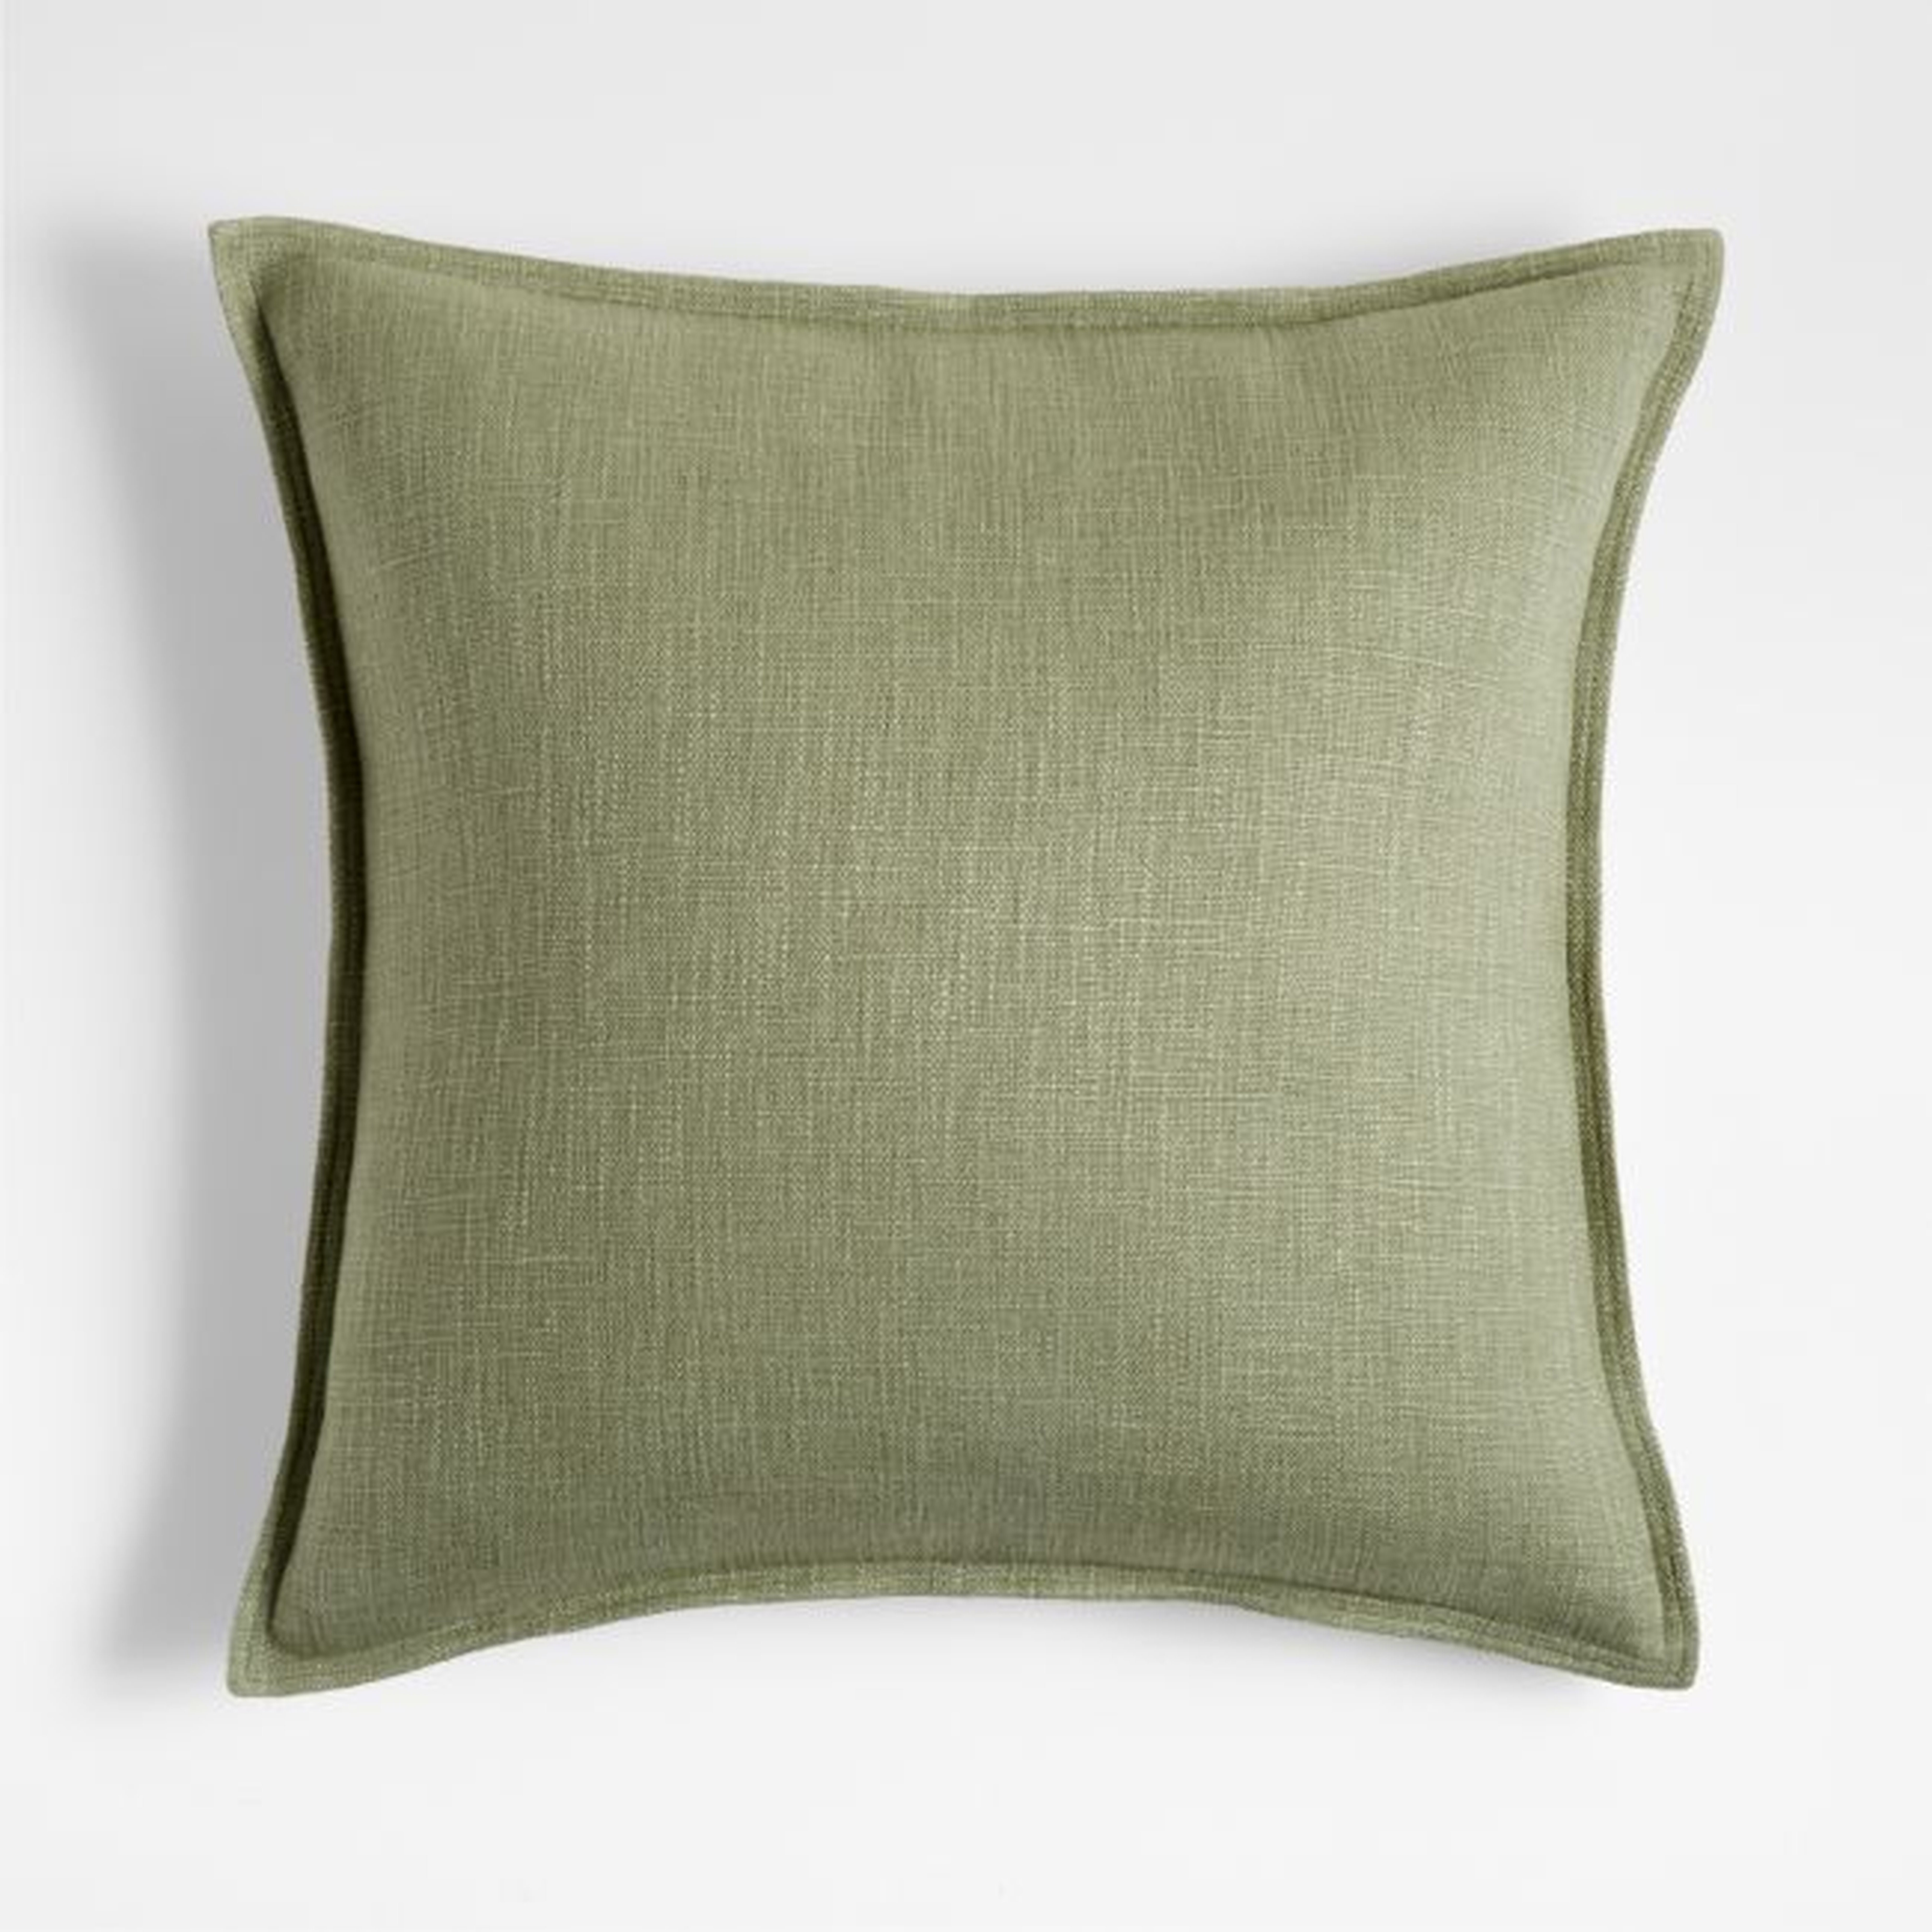 Sage 20"x20" Laundered Linen Throw Pillow with Down-Alternative Insert - Crate and Barrel